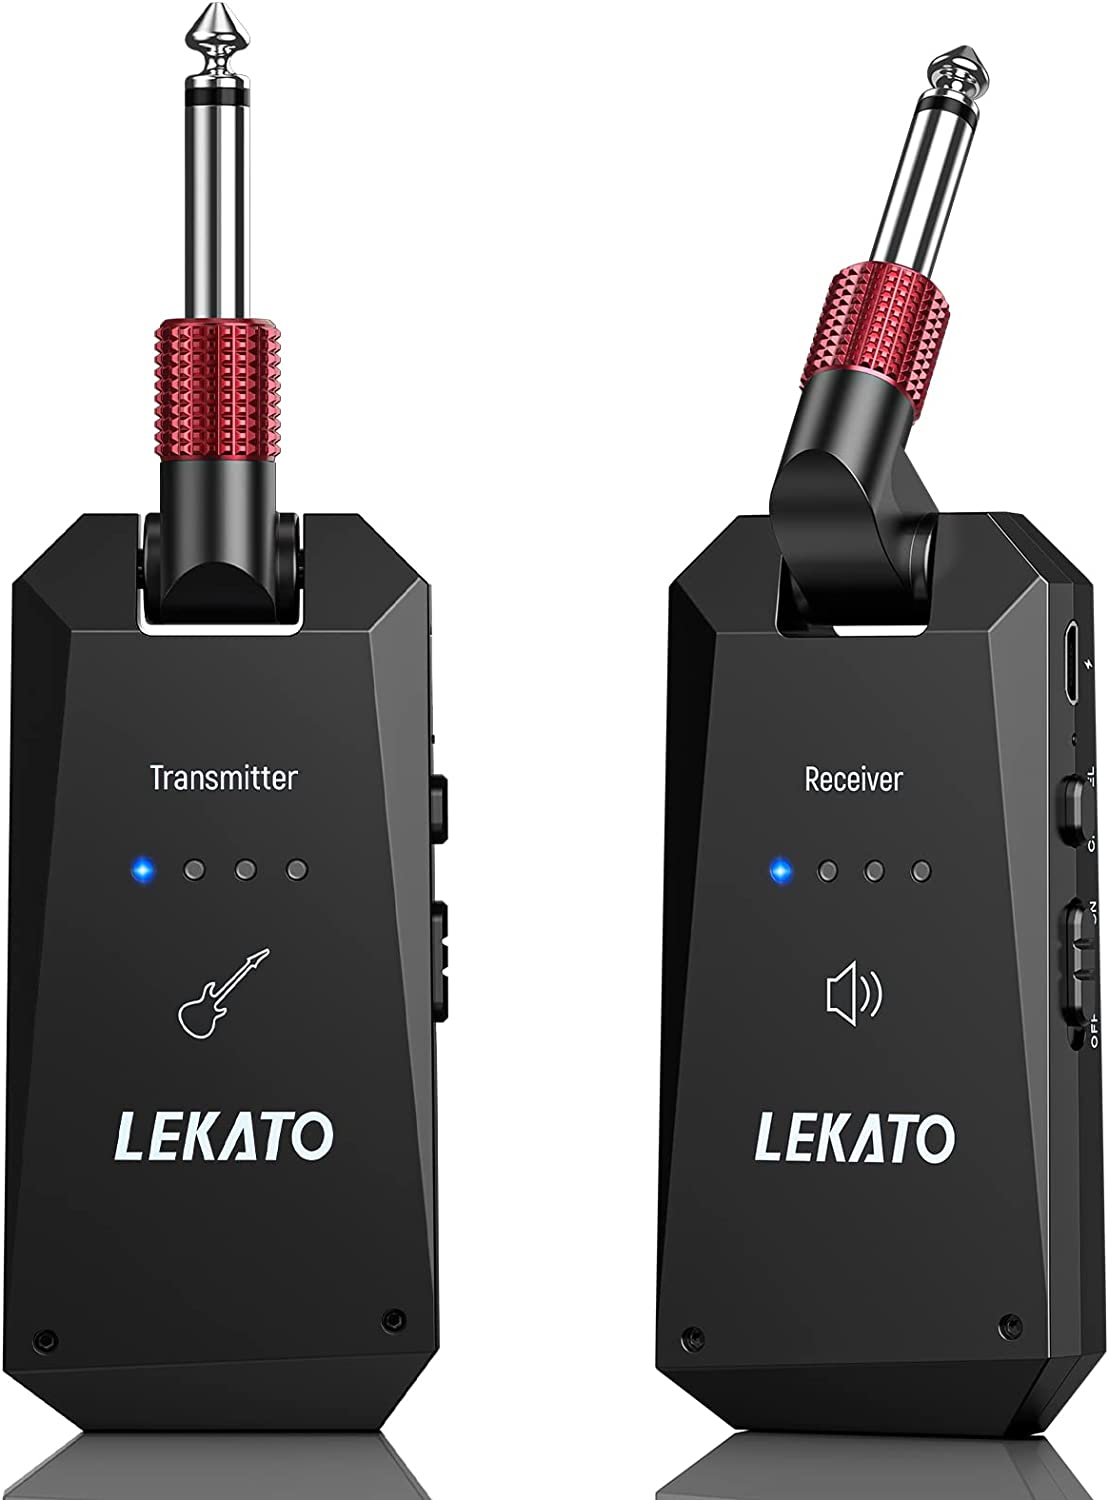 LEKATO WS-90 5.8G Wireless Guitar System Transmitter Receiver (Get $15   Buy Musical Instruments, Pedals, Wireless, Drum, Pro Audio & More - LEKATO